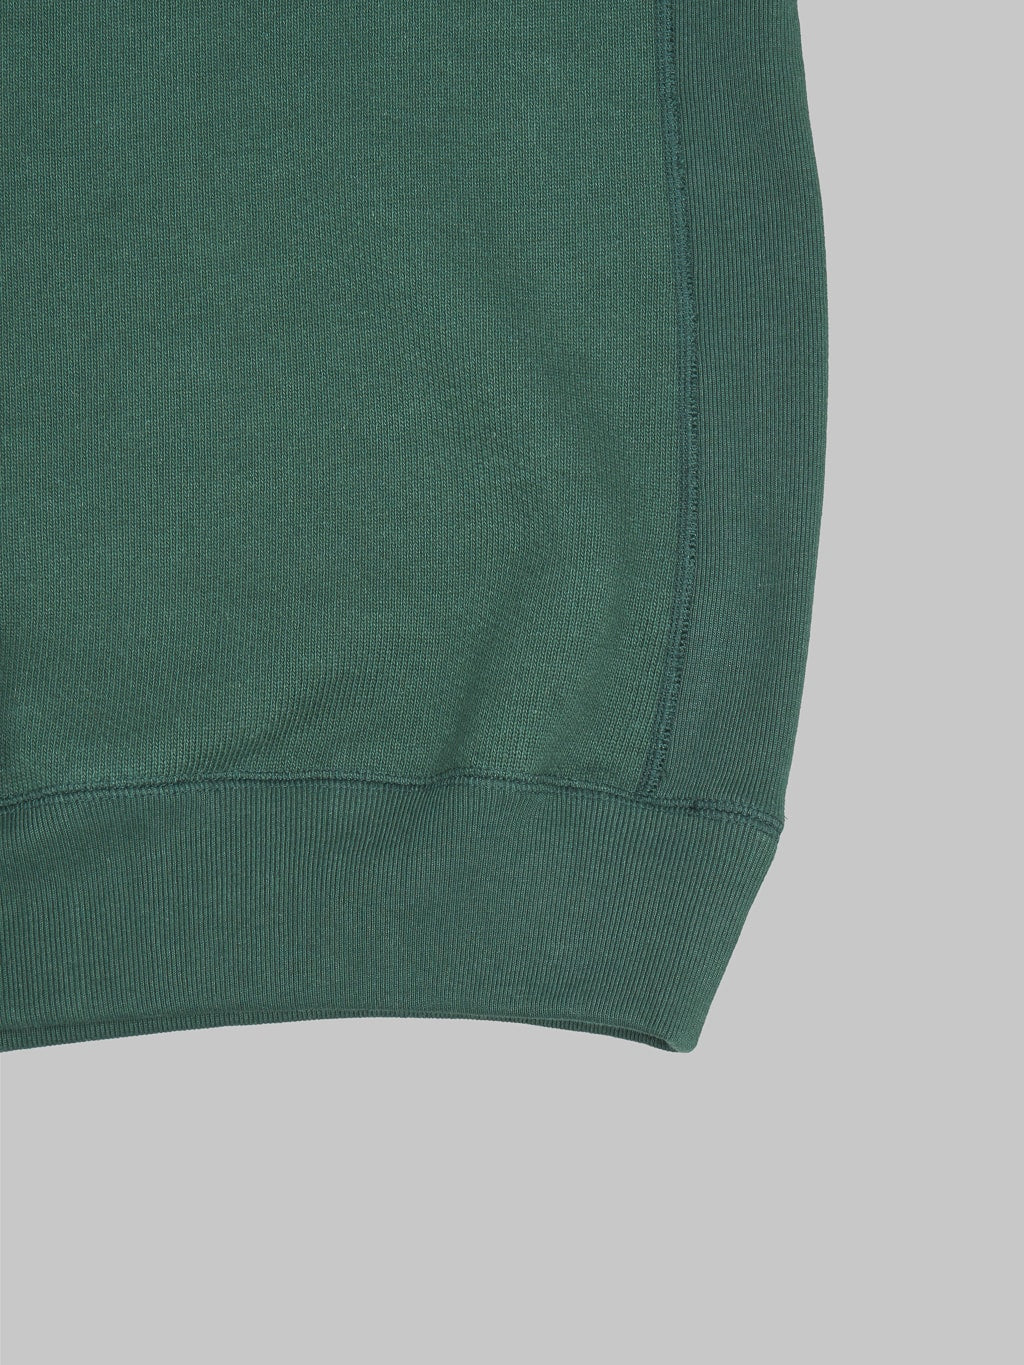 Wonder Looper Pullover Crewneck 701gsm Double Heavyweight French Terry Green hem finishing 